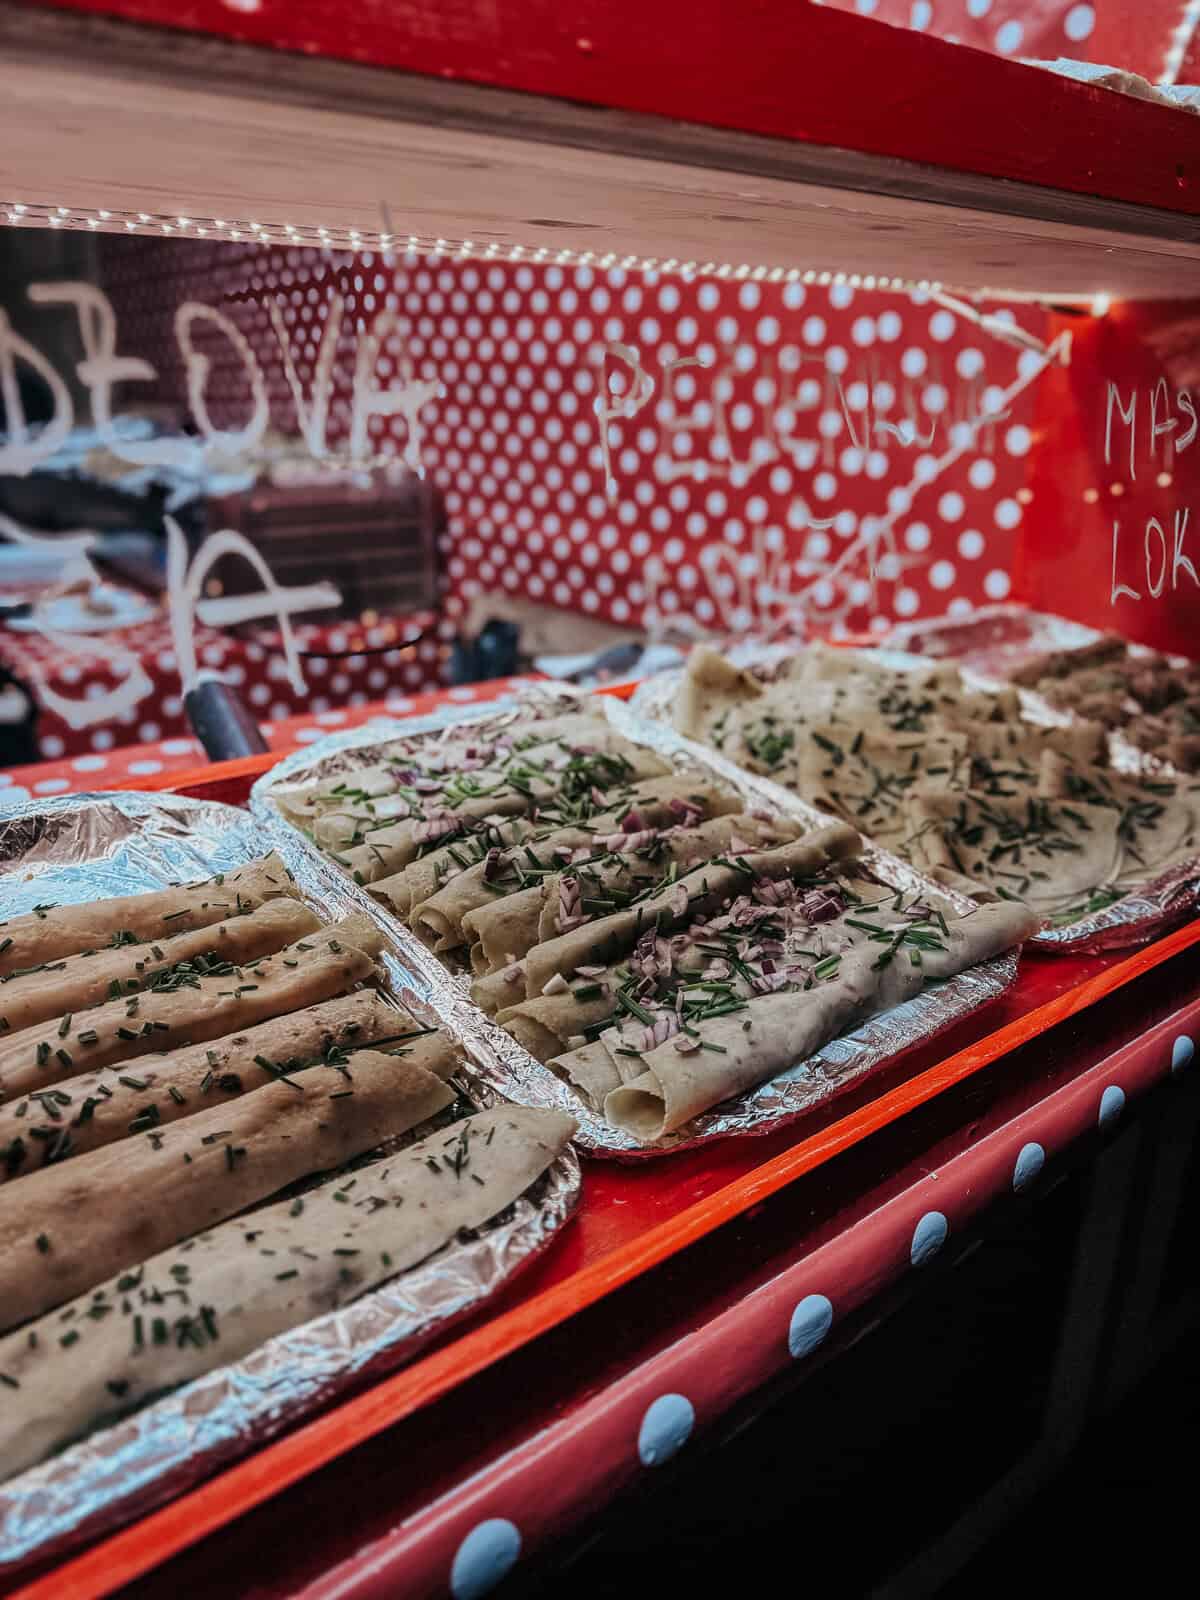 Street food stall presenting Palacinky pancakes rolled with savory fillings of ham and herbs, displayed on a red and white polka dot surface under soft lighting